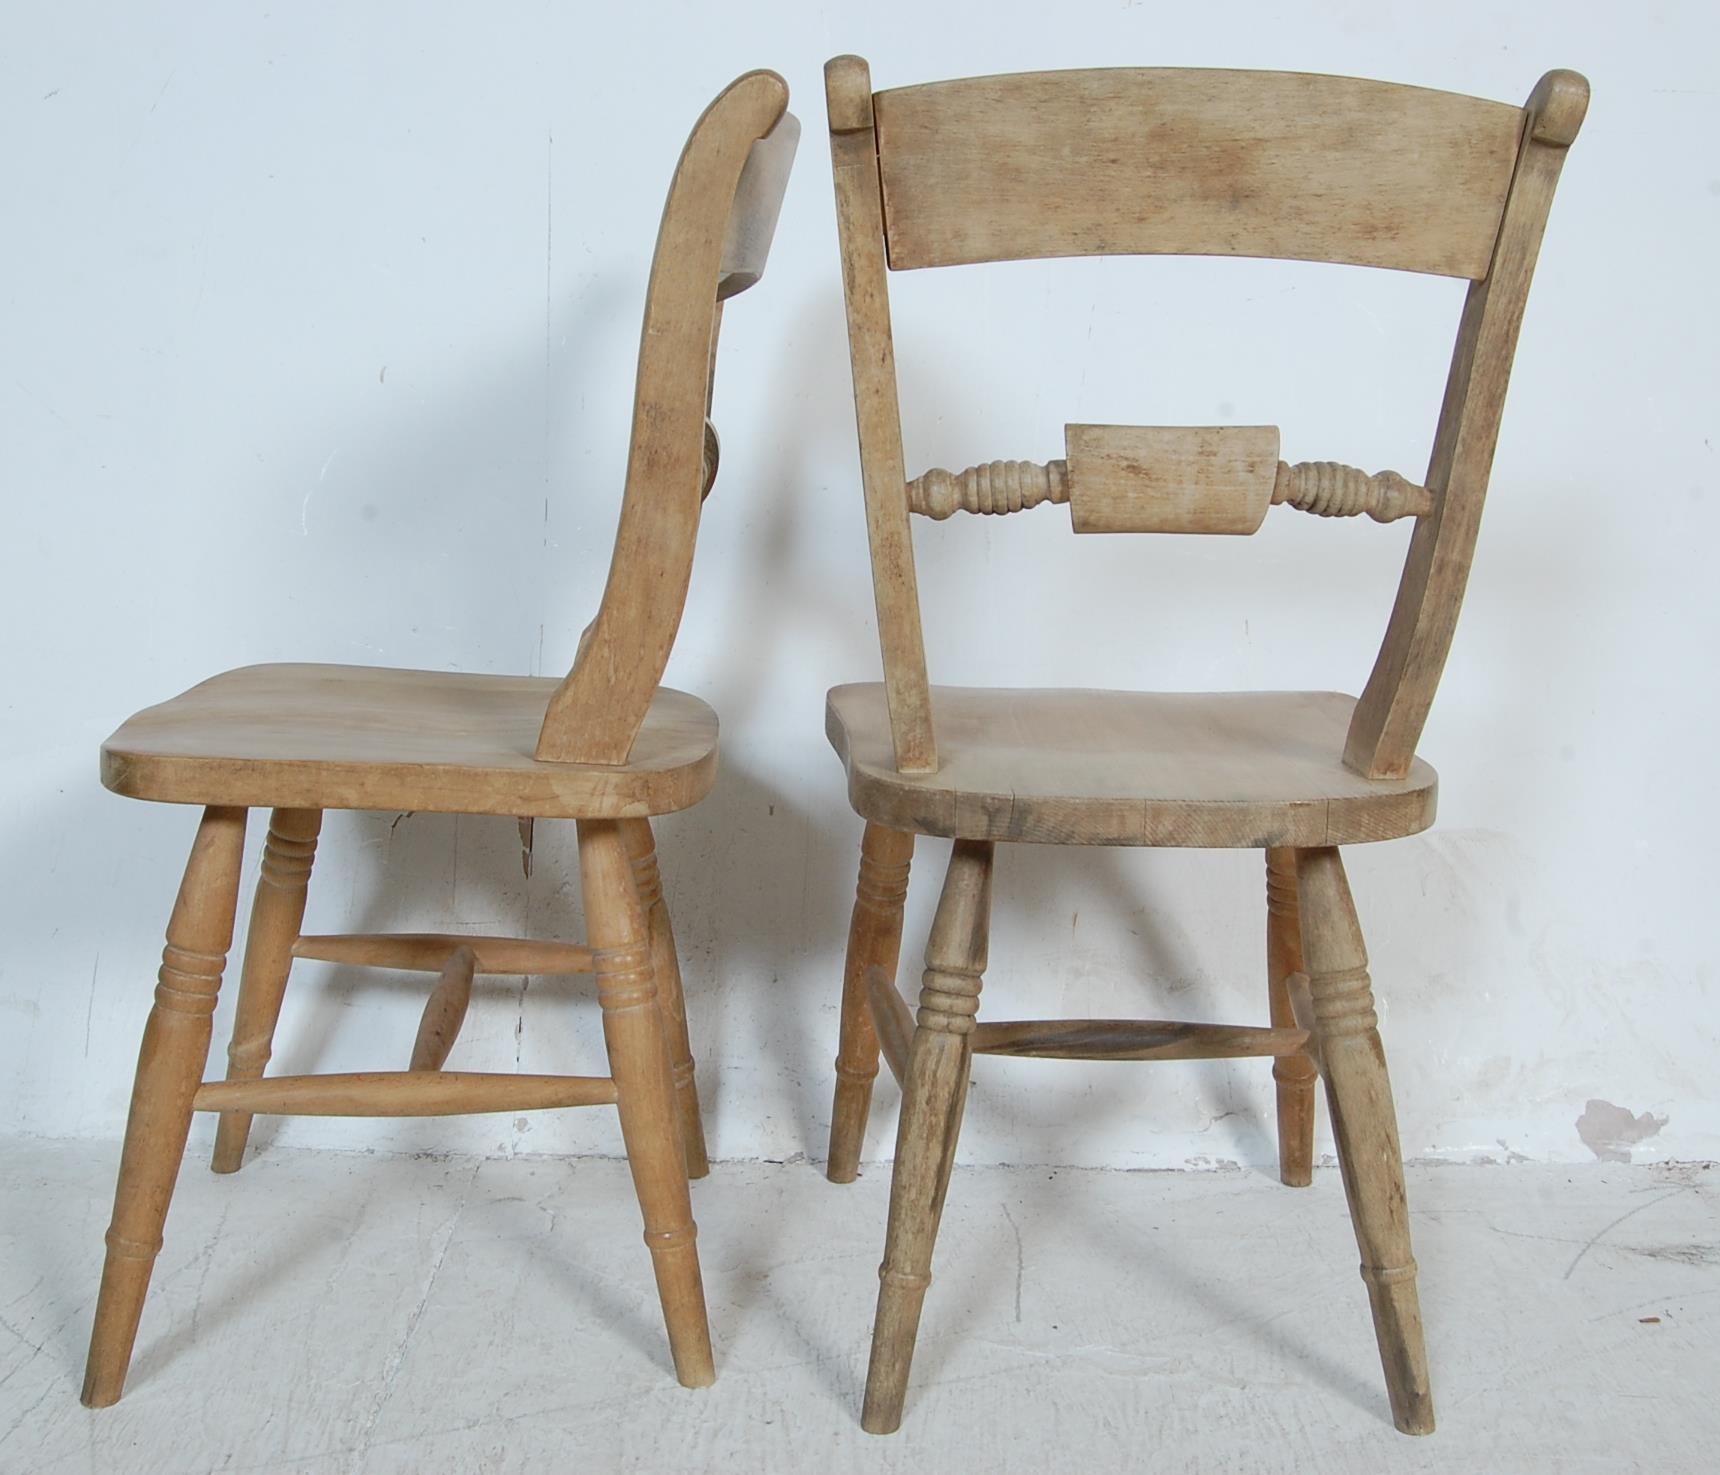 SIX VICTORIAN STYLE DINING CHAIRS - Image 5 of 5